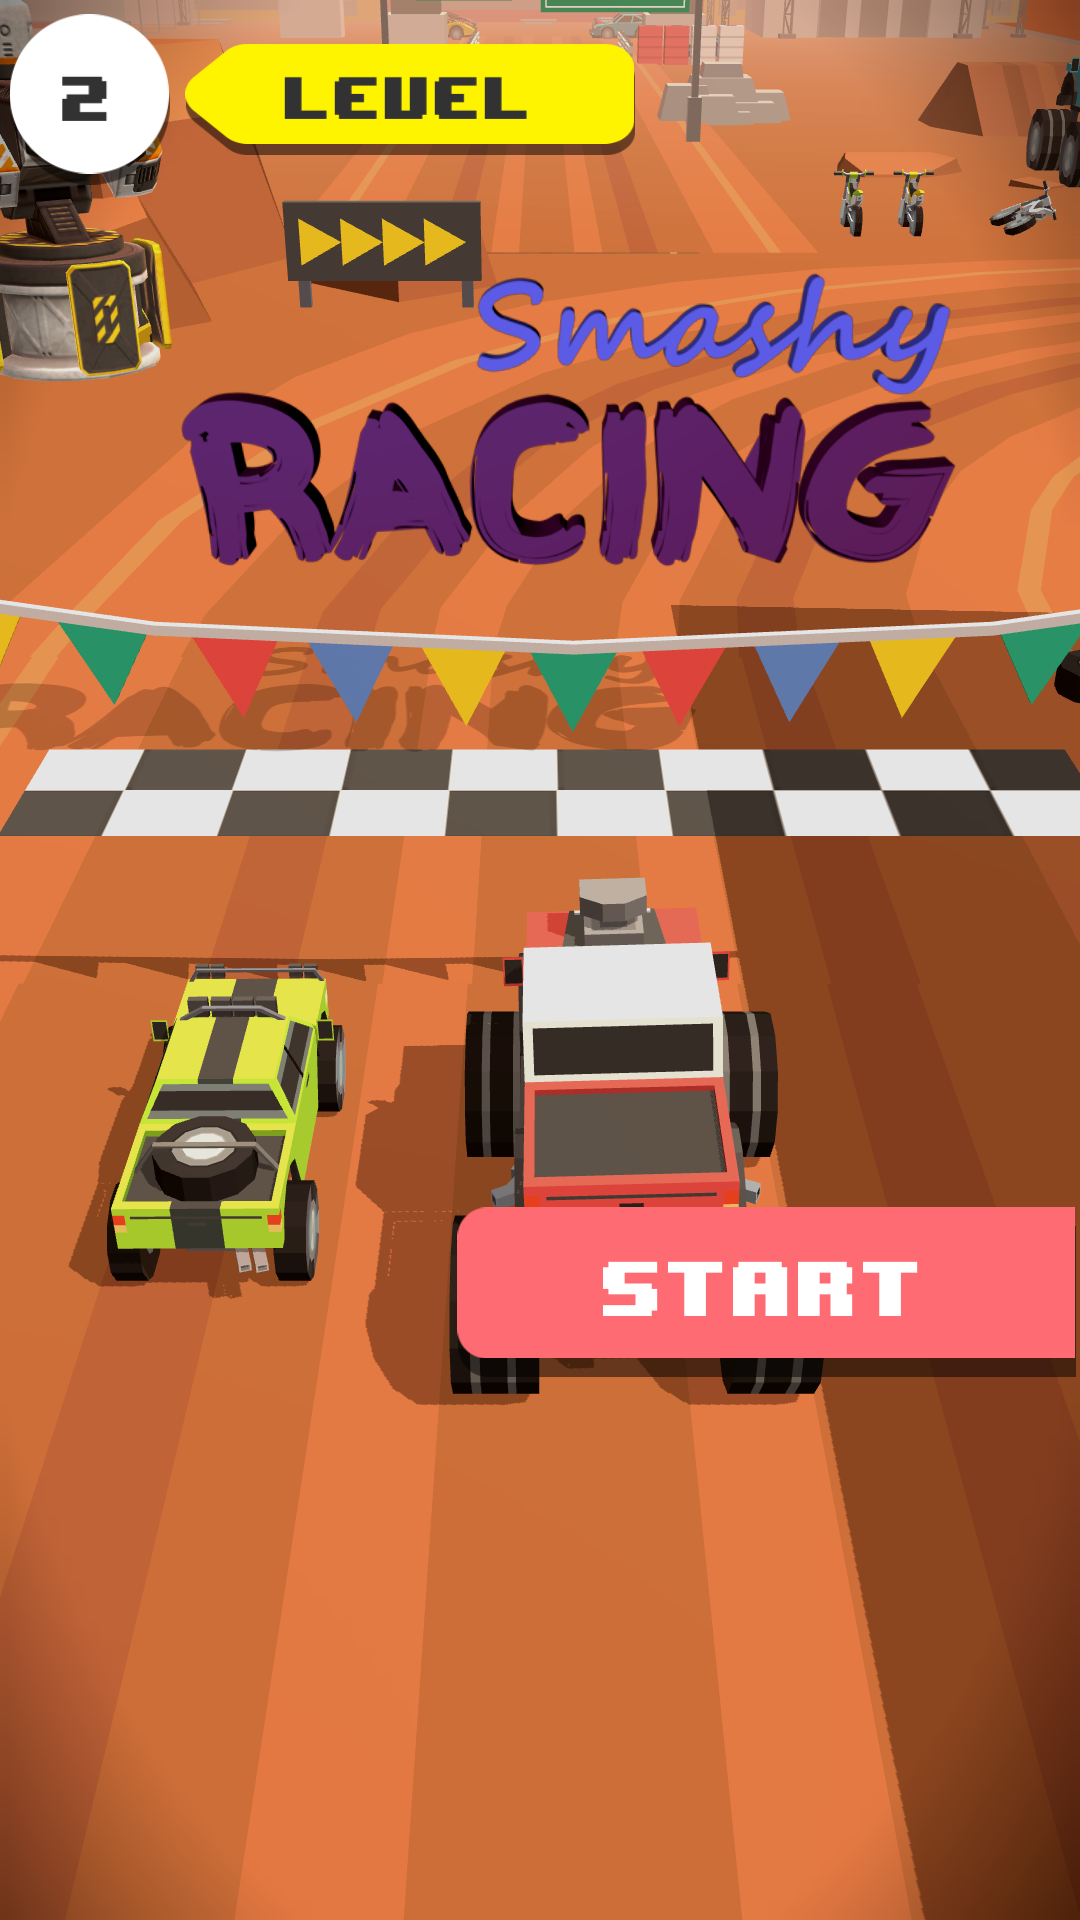 How to Download RCC - Real Car Crash Simulator on Android